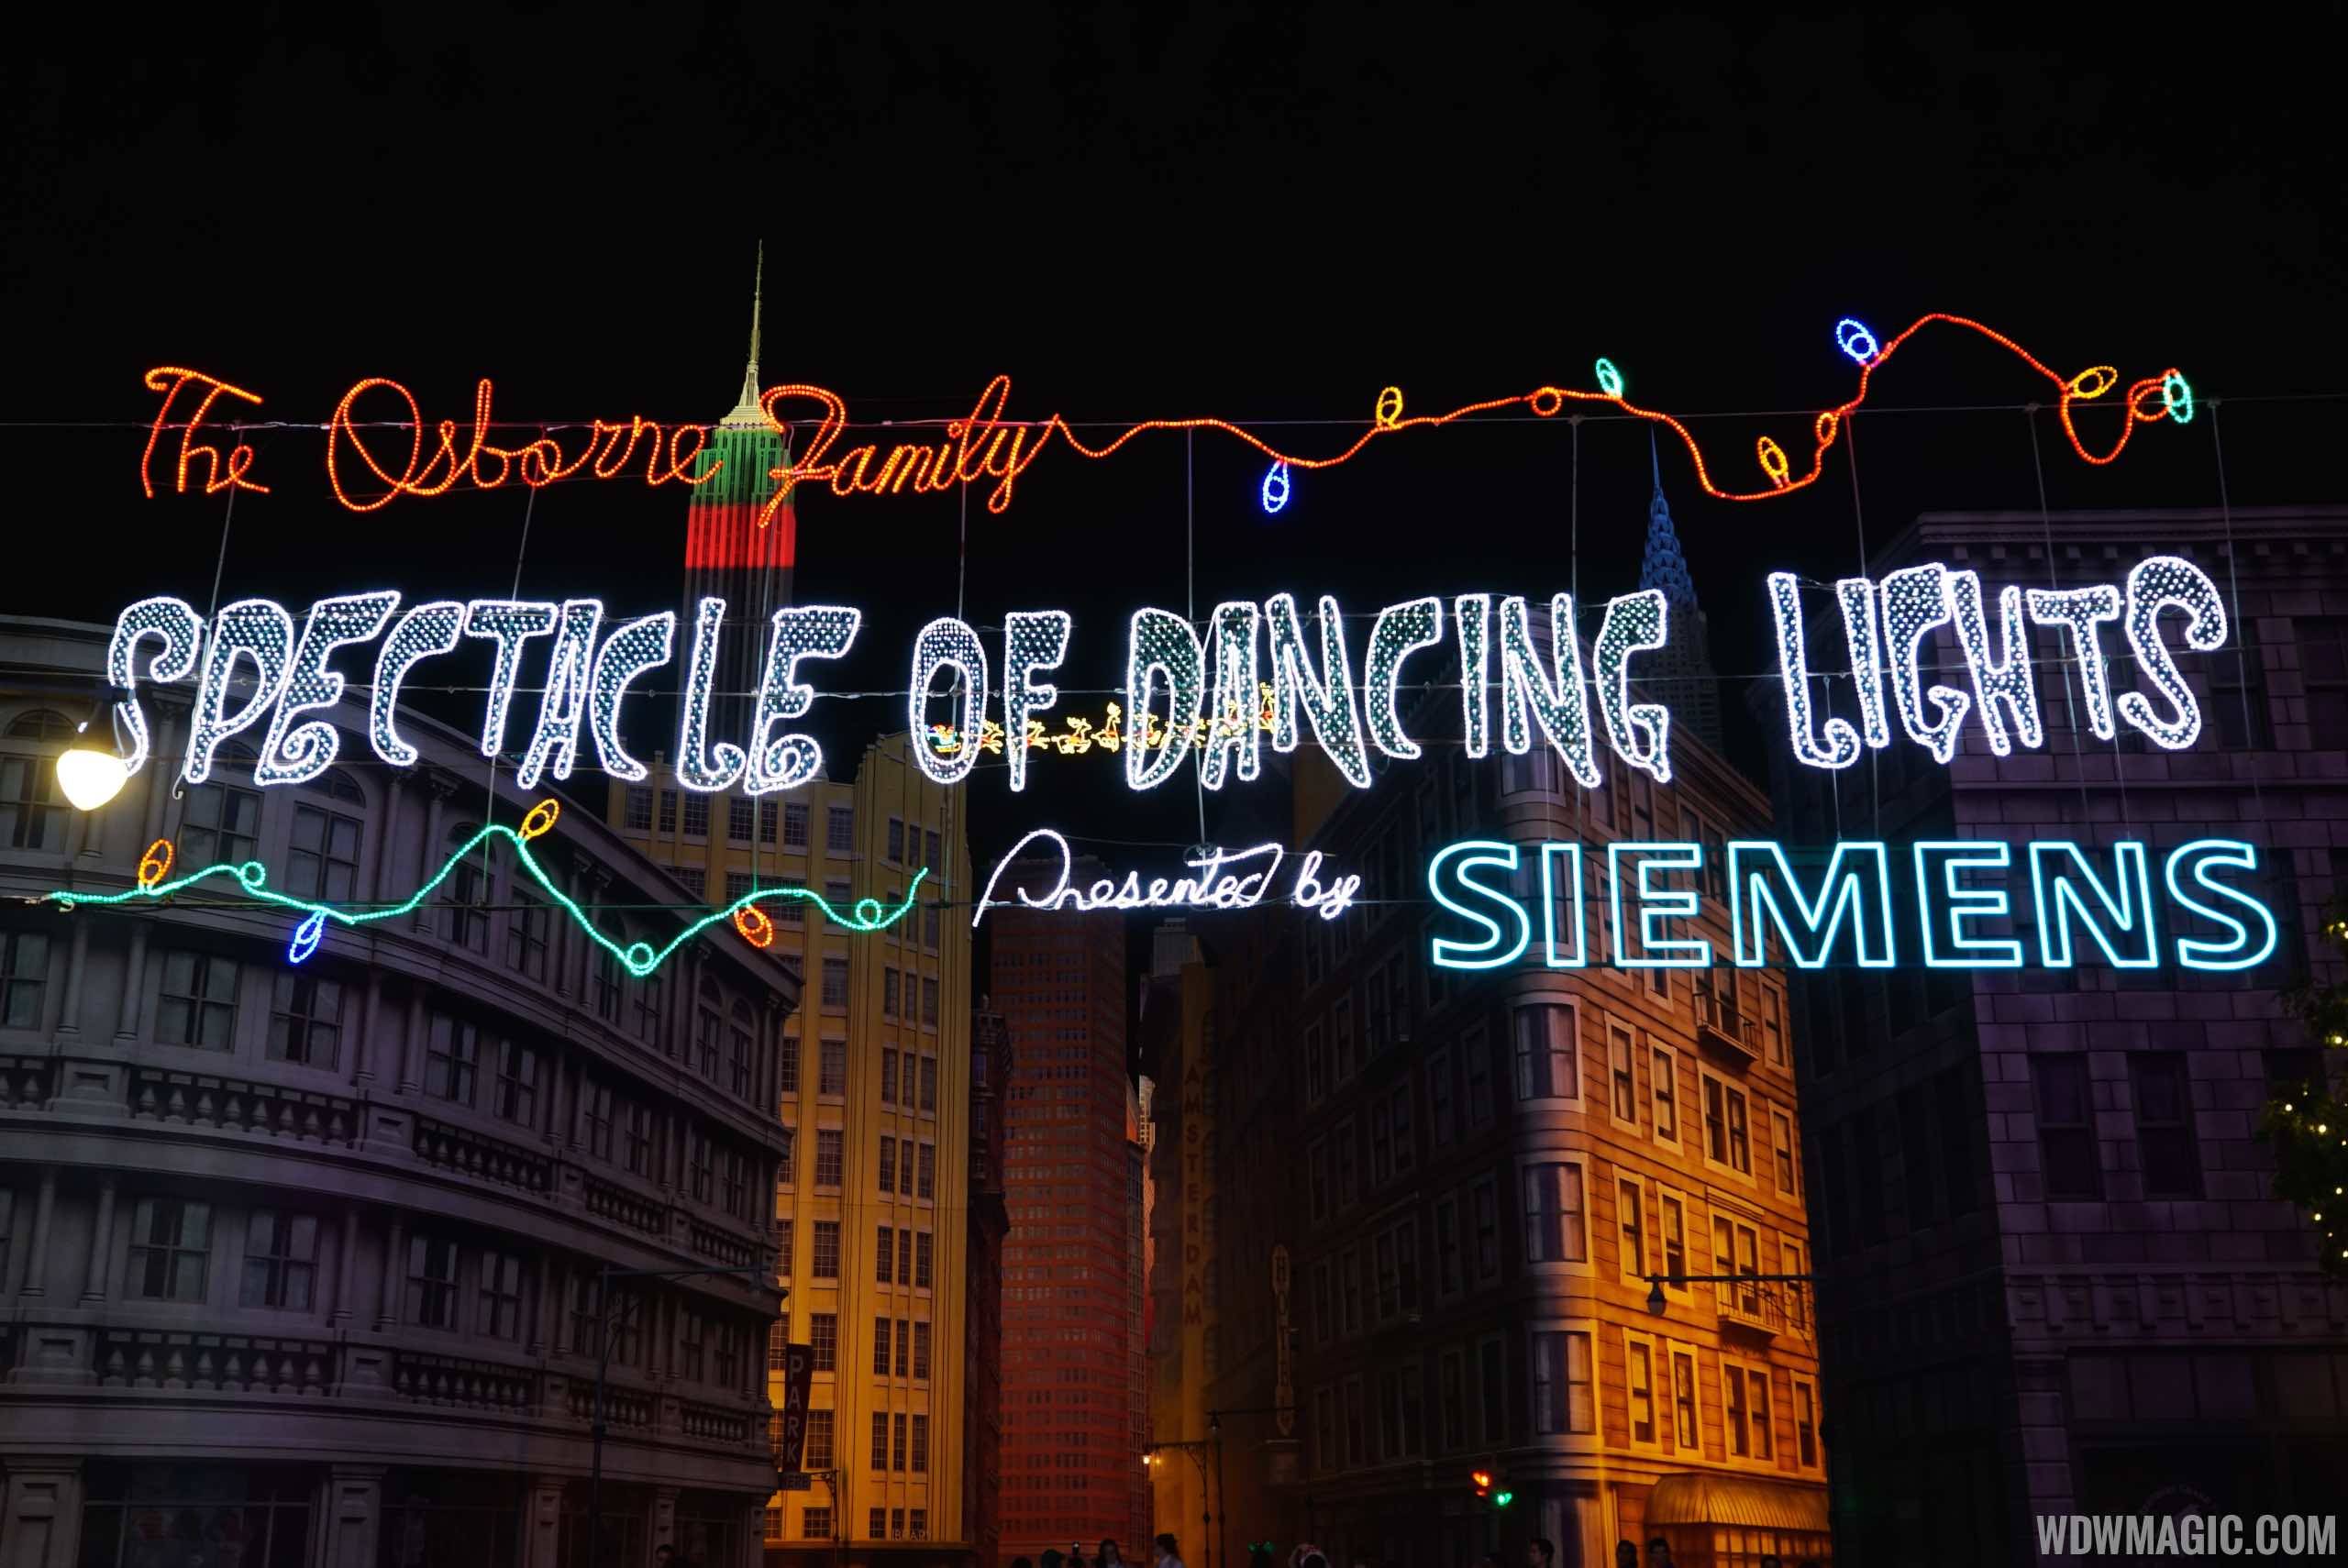 No performance of the Osborne Family Spectacle of Dancing Lights on December 1